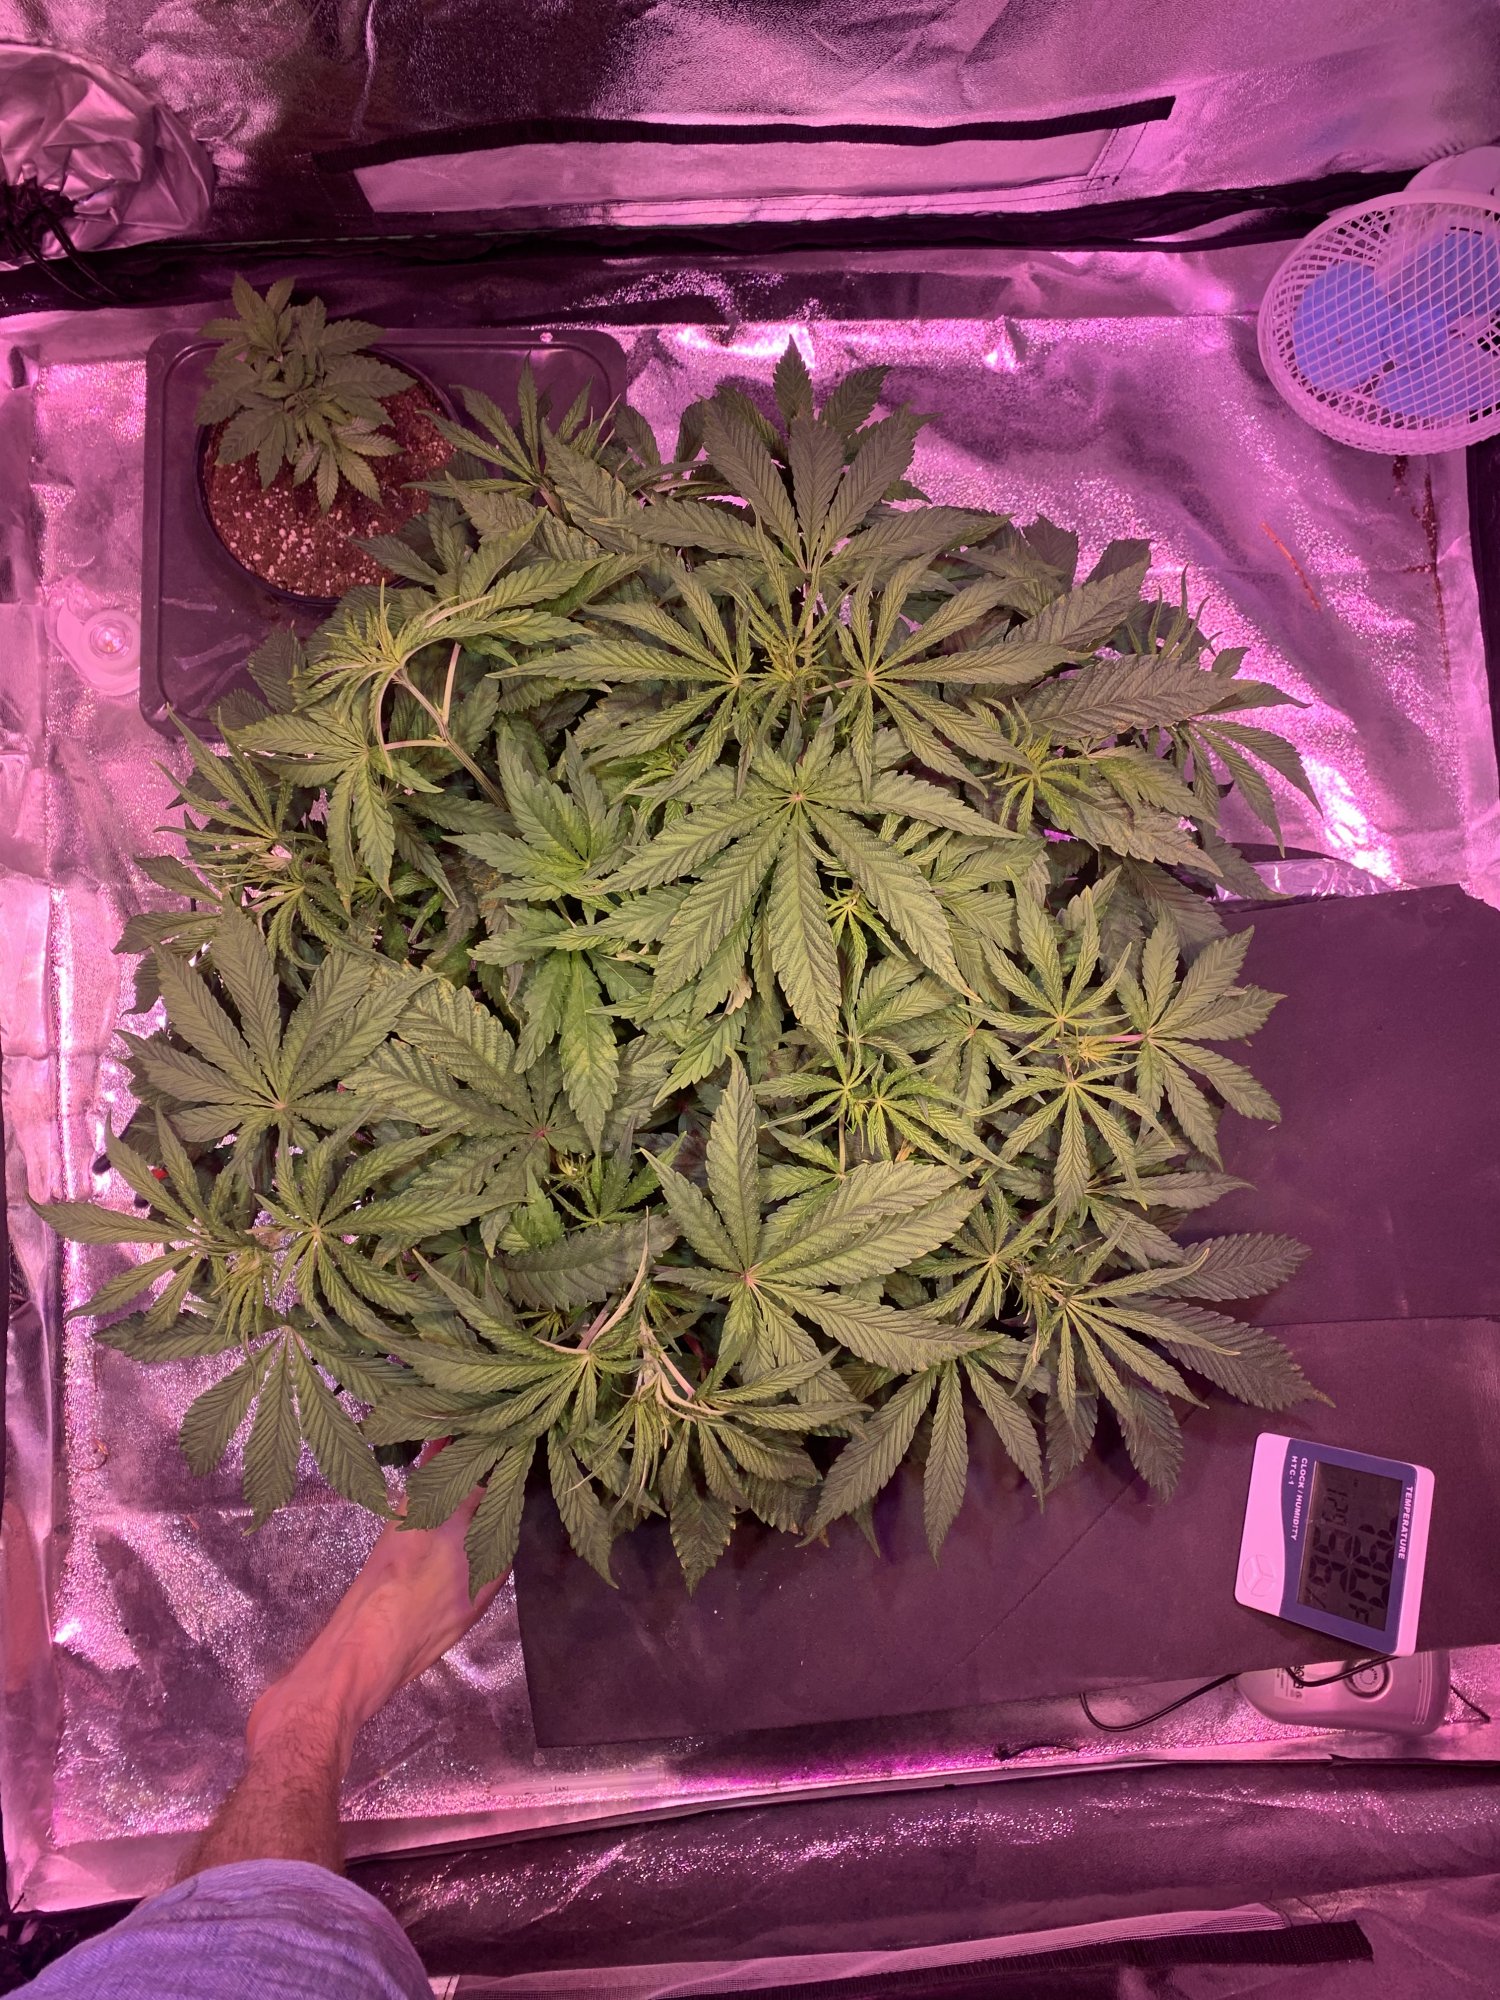 I need help for my second grow opinions wanted 3